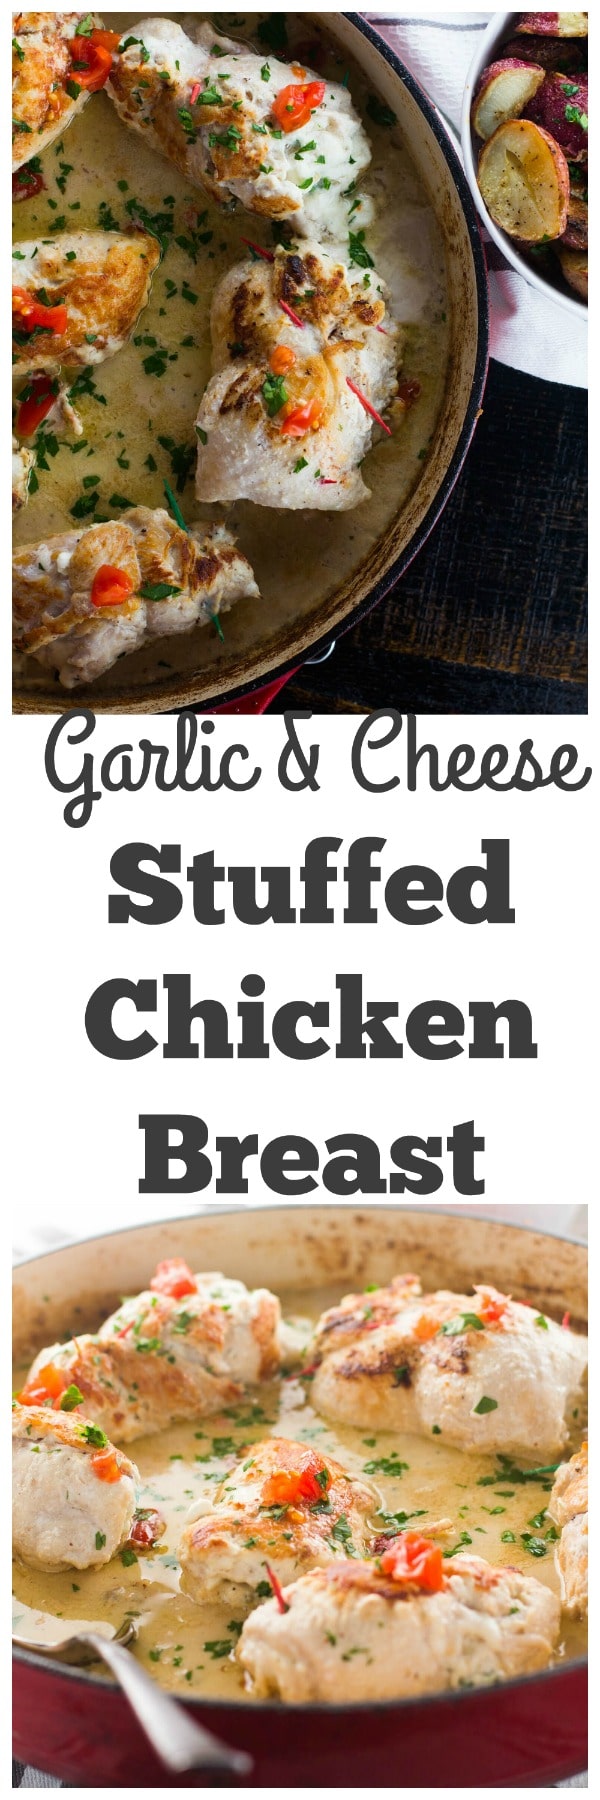 This stuffed chicken breast is loaded with silky and creamy garlic cheese and surrounded by a creamy white wine and shallot sauce. Quick, easy and the perfect mid-week meal.